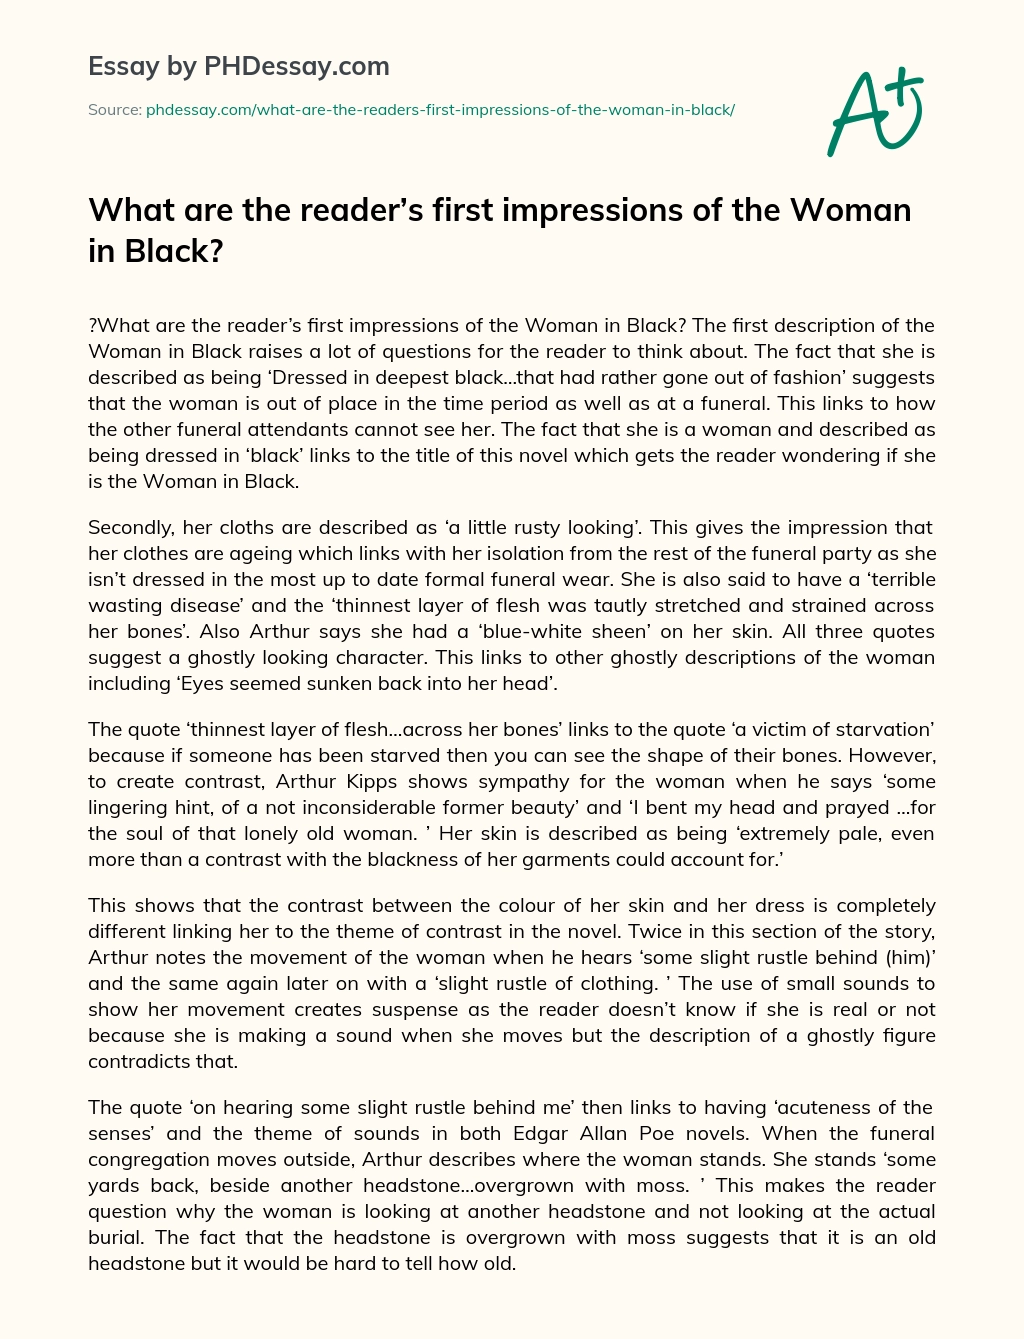 What are the reader’s first impressions of the Woman in Black? essay